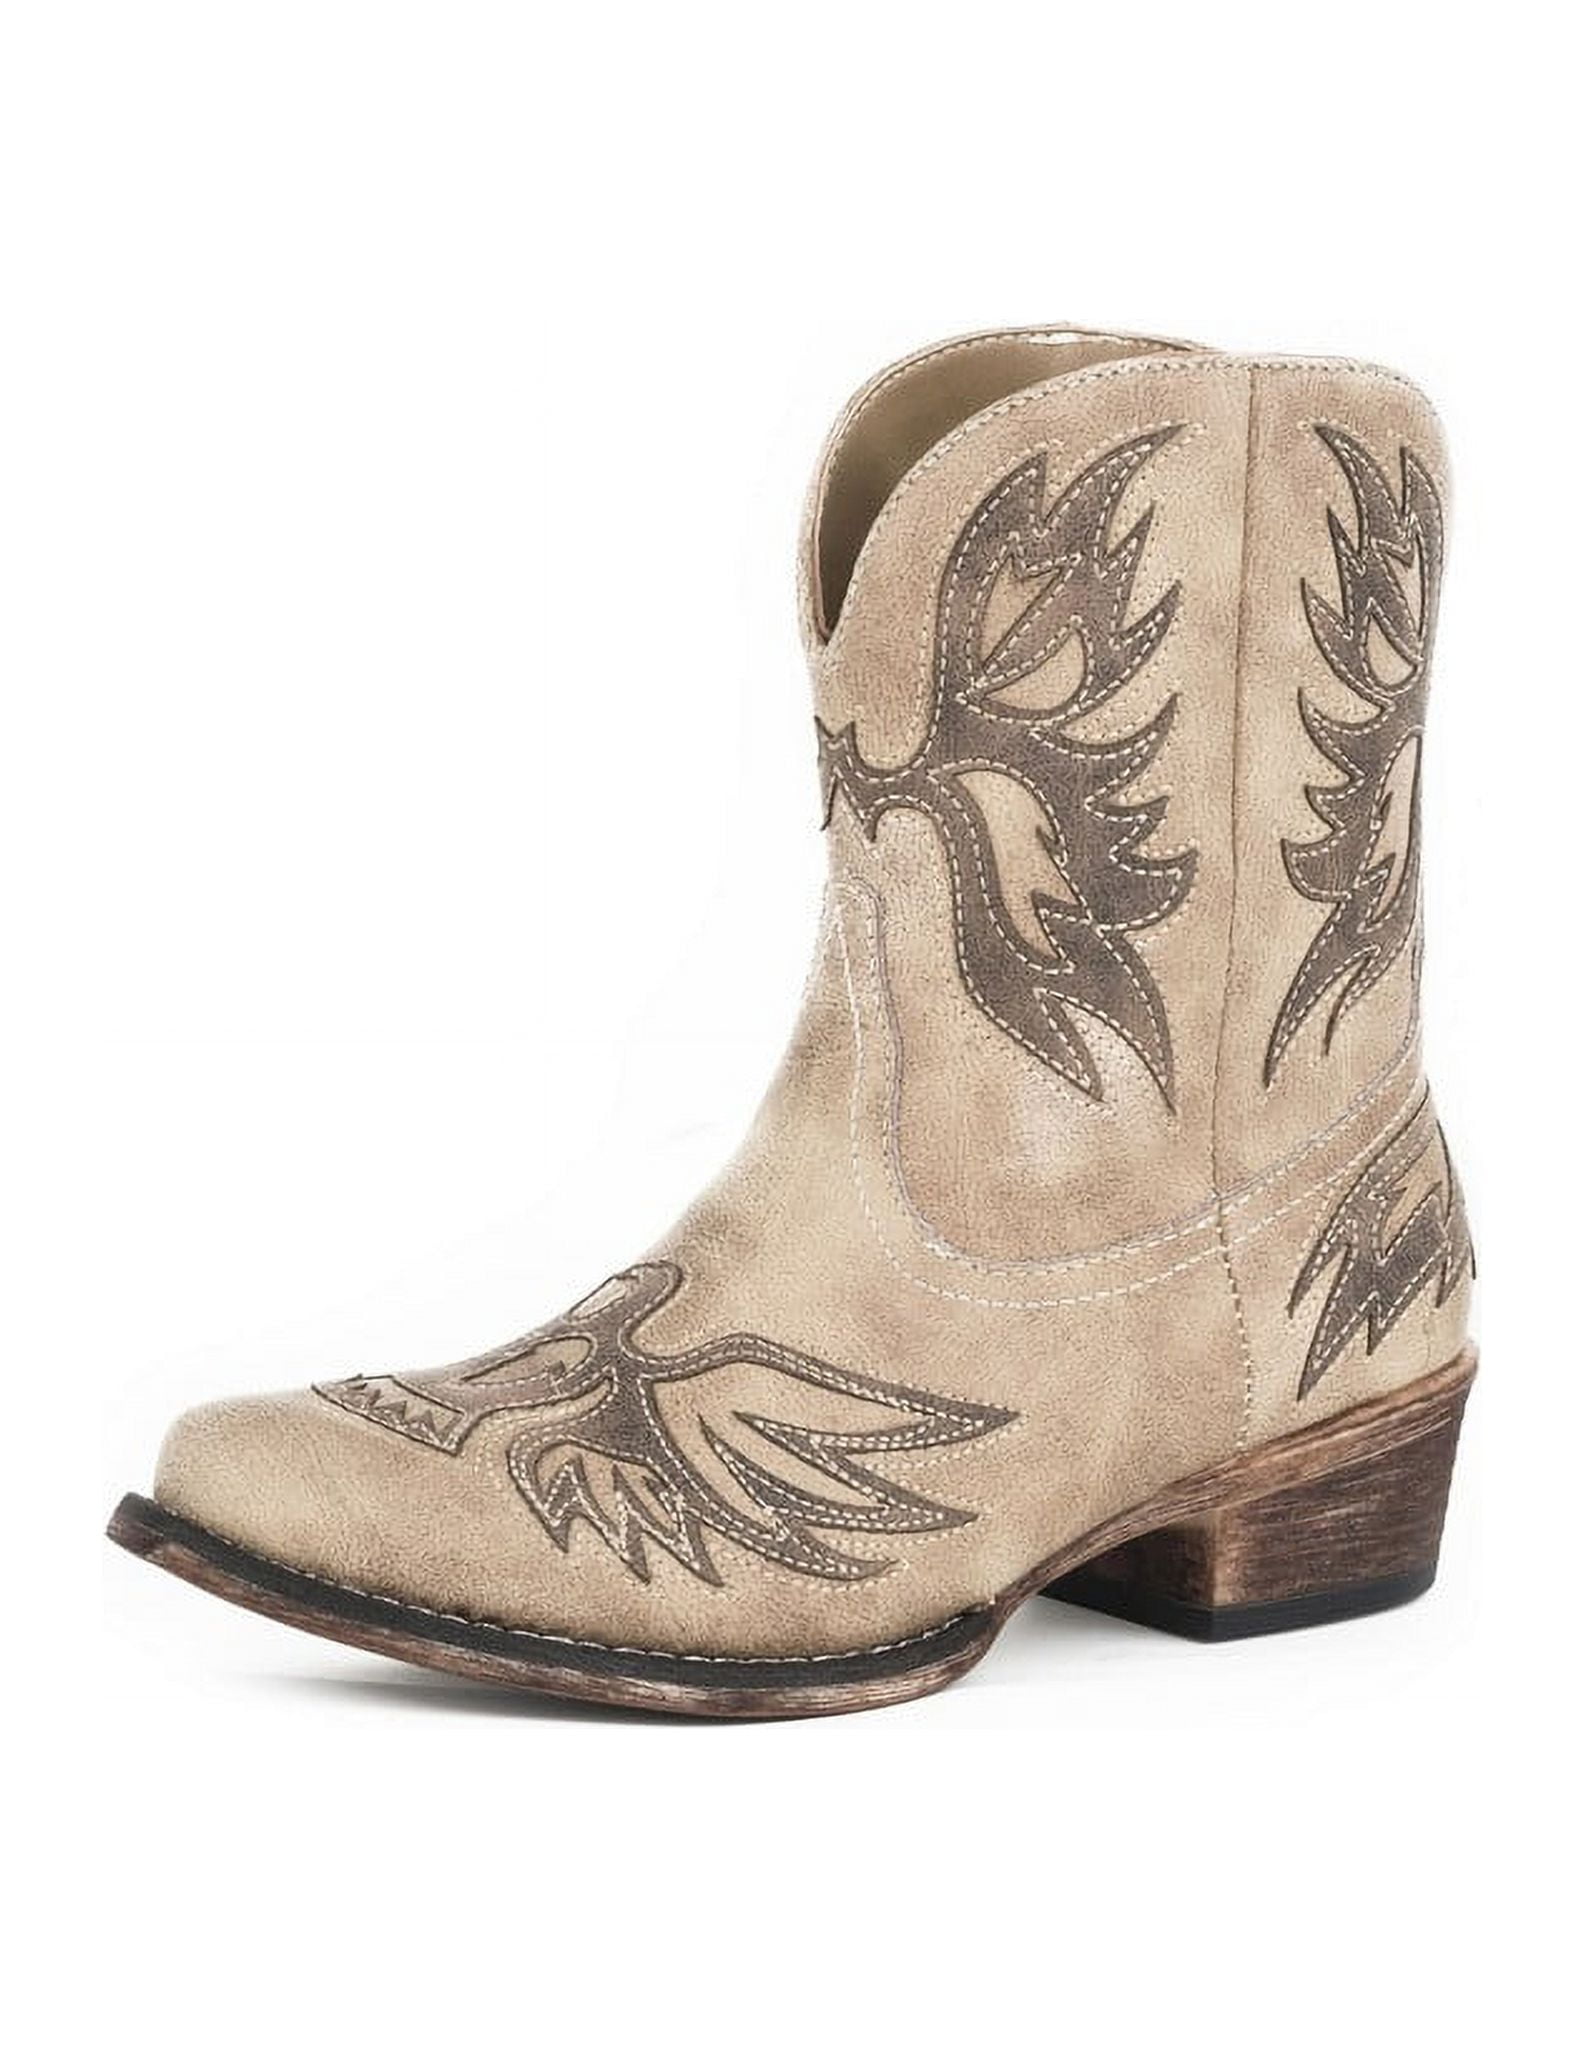 Western Buckle Boots